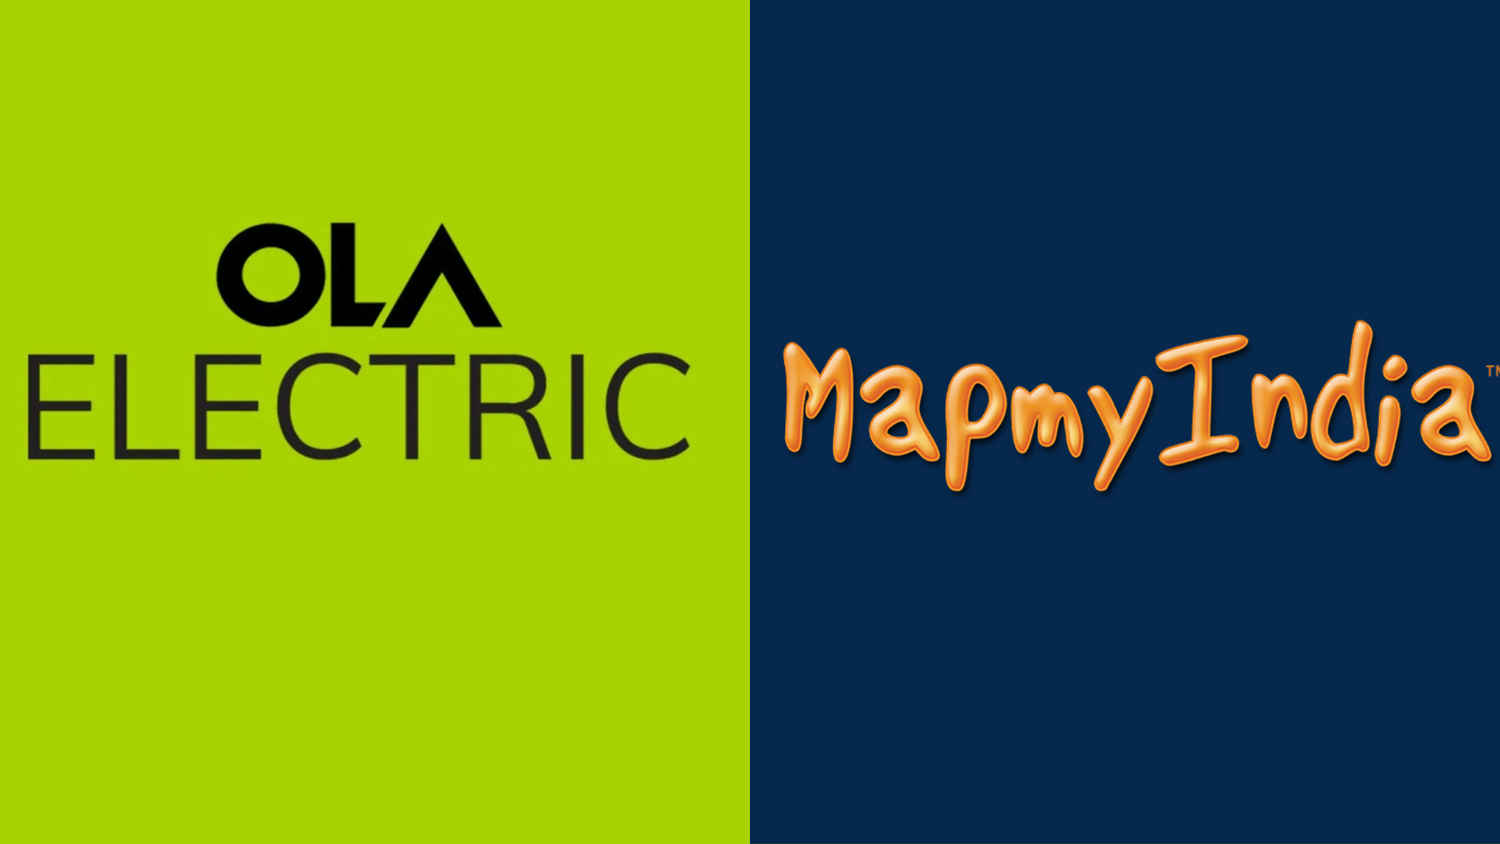 Ola Electric gets legal notice from MapMyIndia for copying data for its own map service